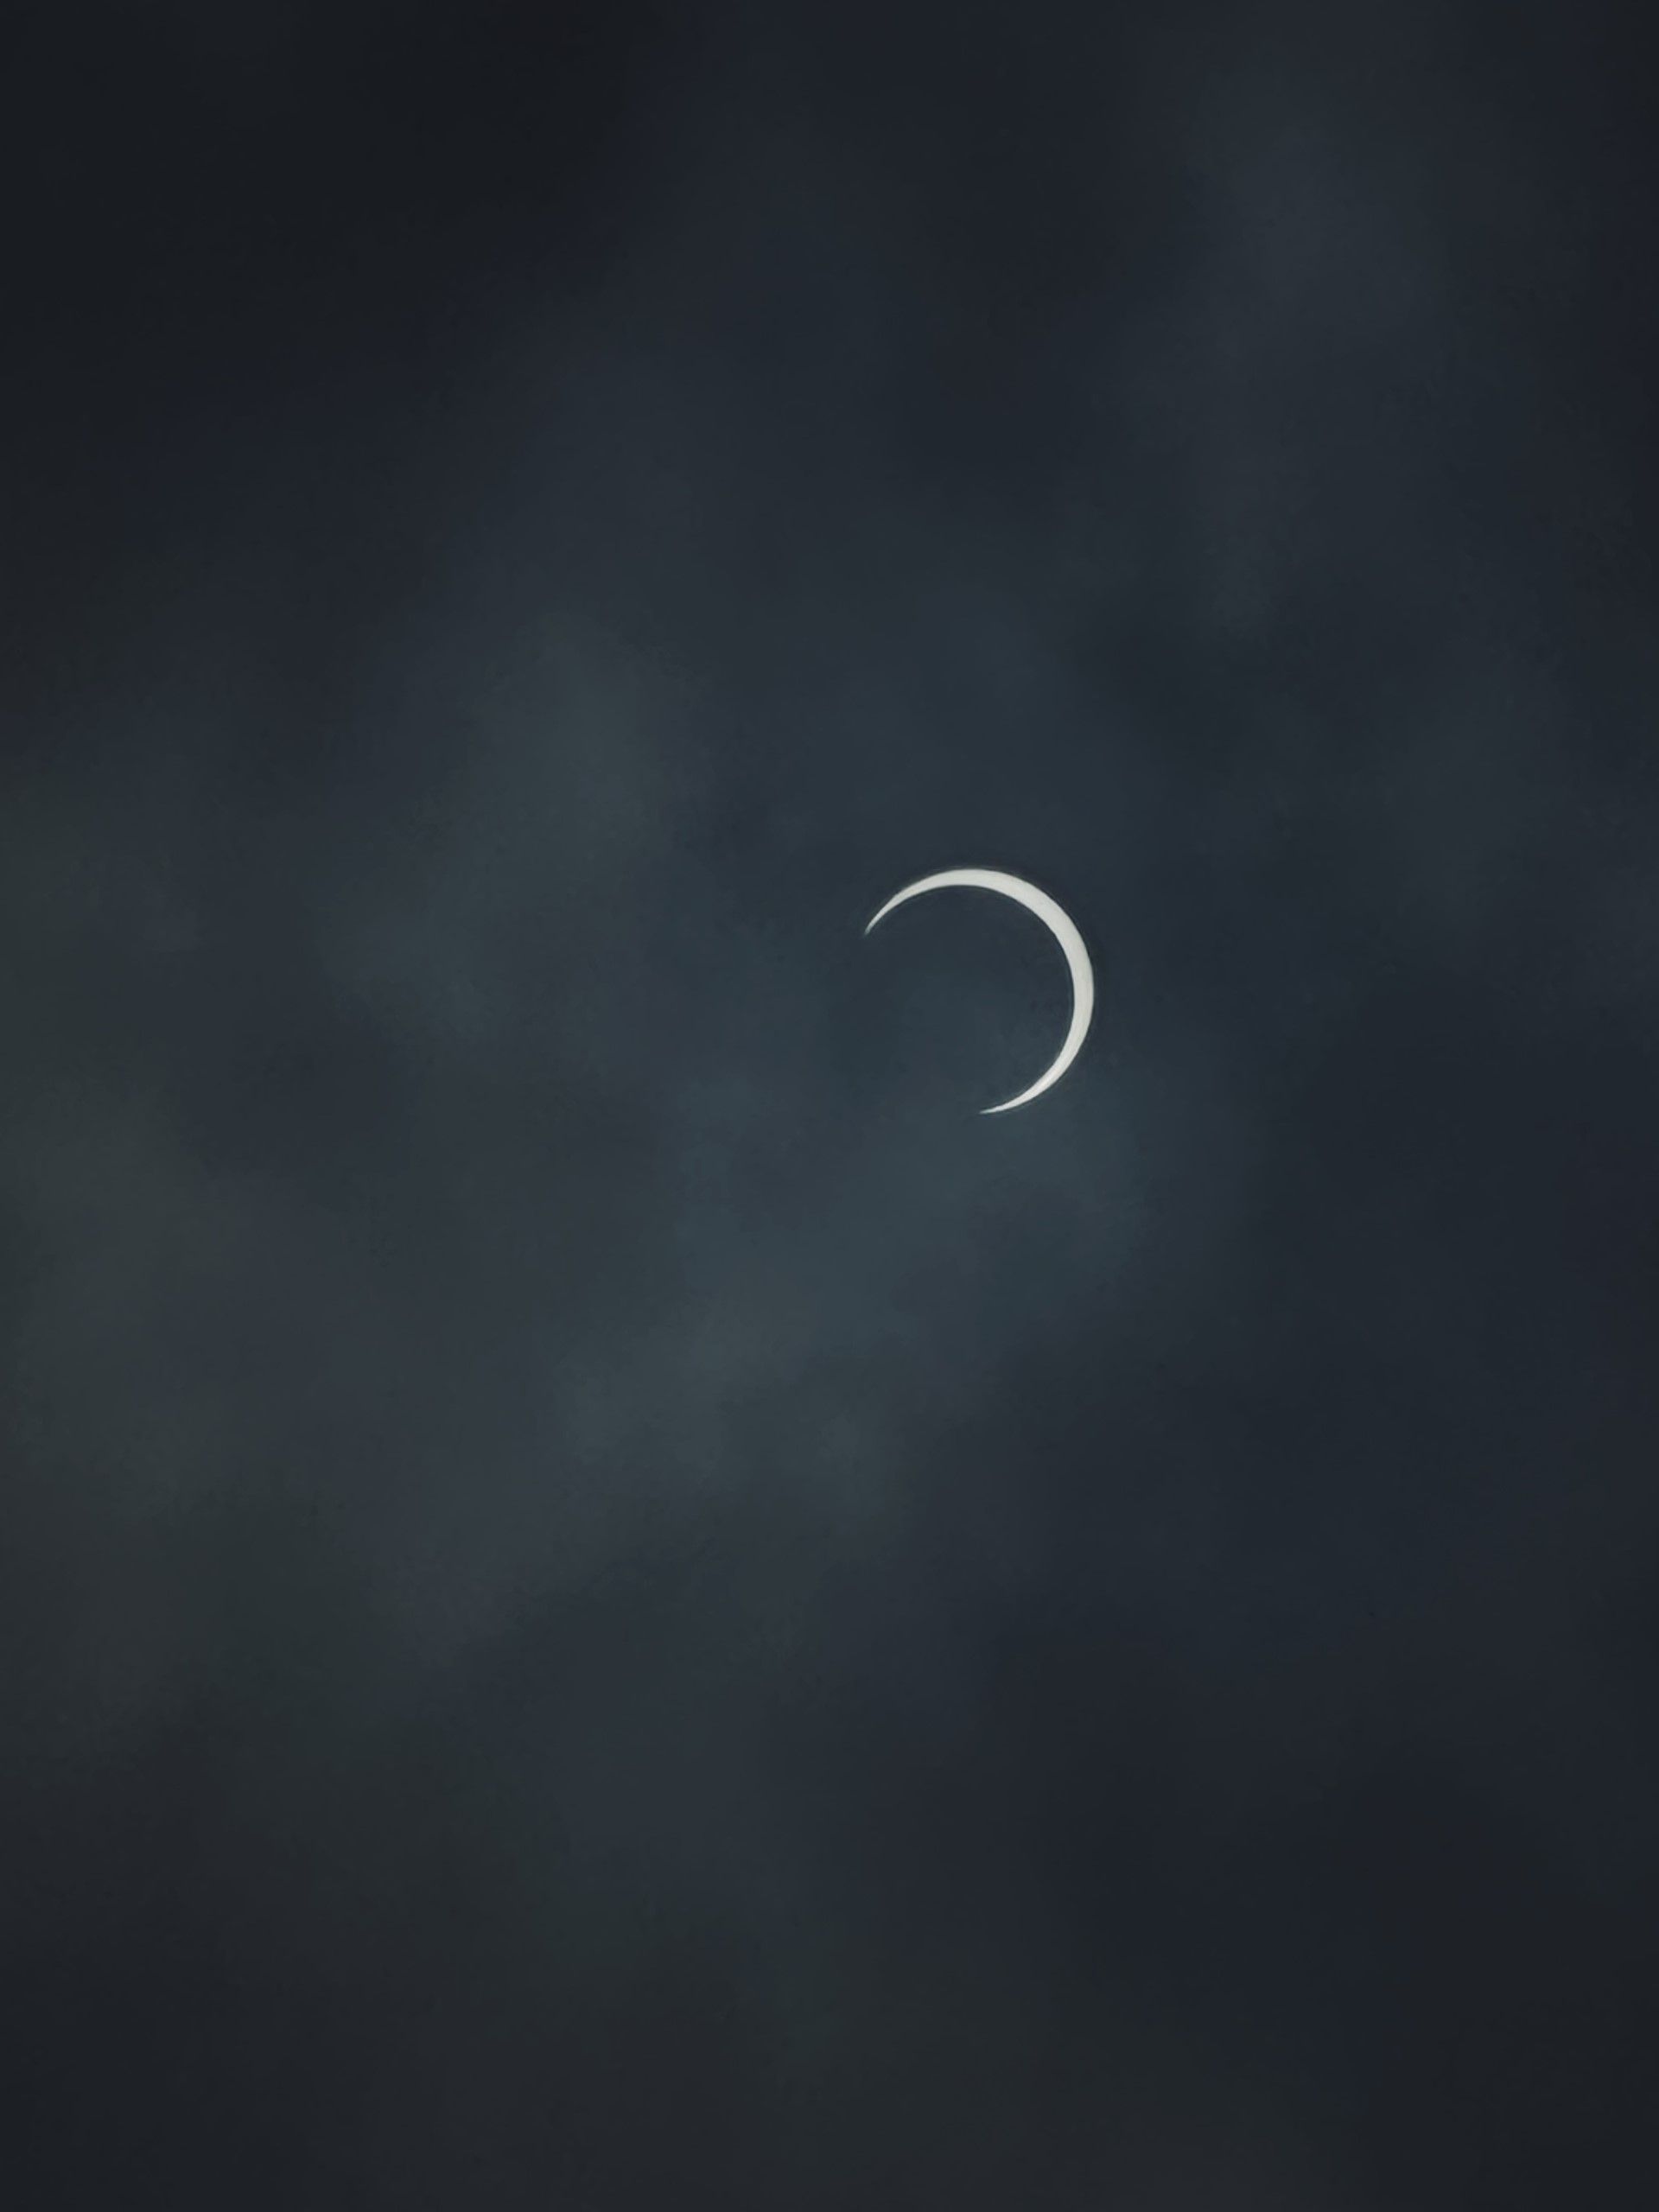 A partially eclipsed sun, with a thin crescent of the moon visible in a dark sky. - Eclipse